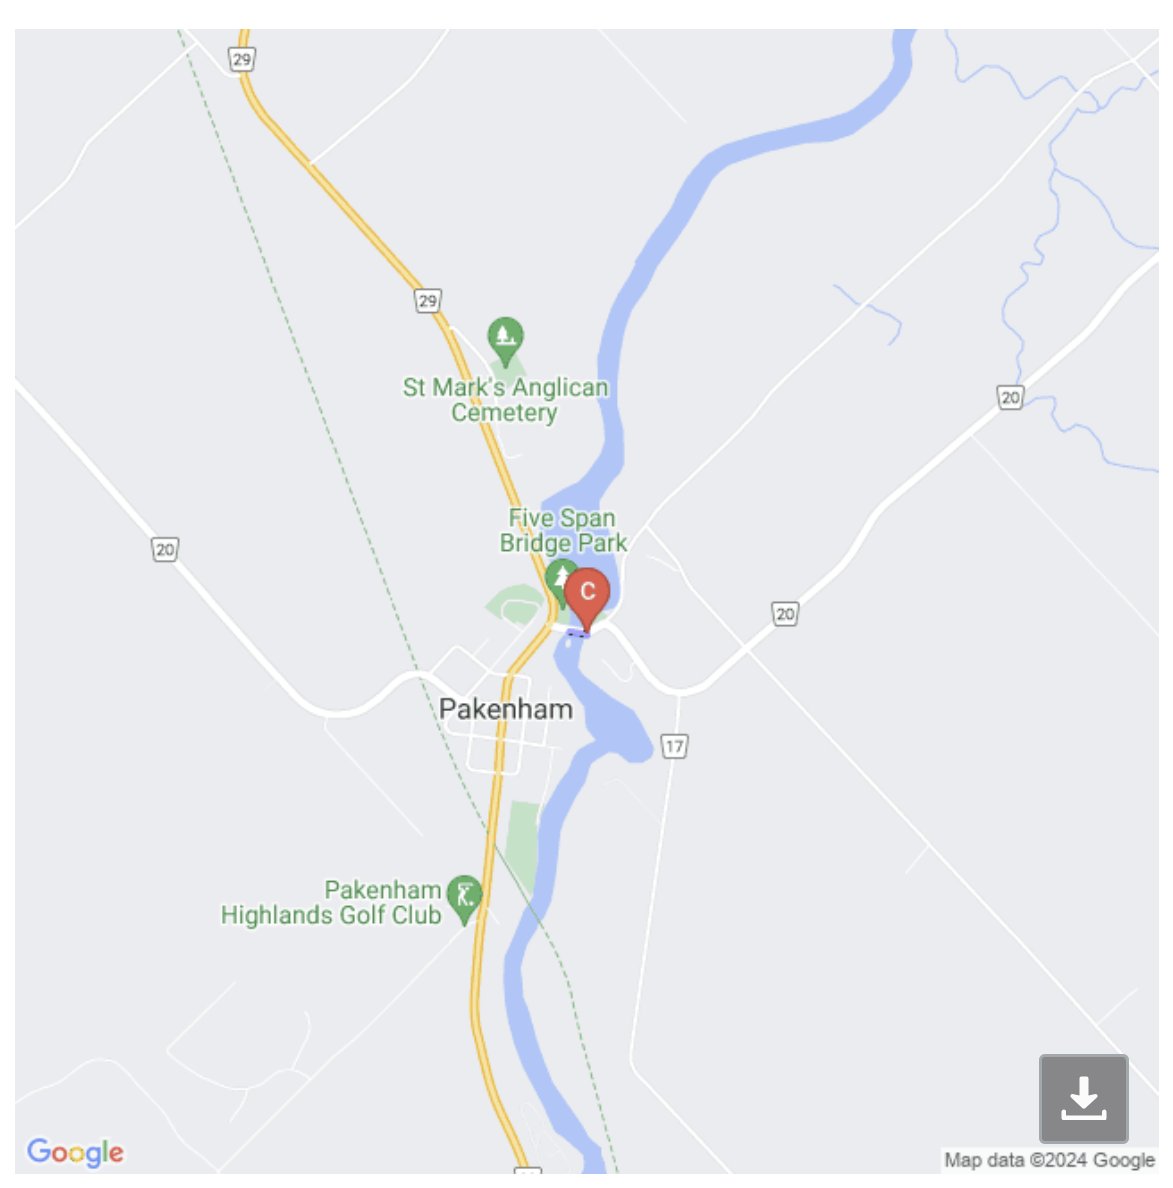 CLOSURE TODAY (APRIL 24): The 5-Span Bridge in Pakenham will be temporarily closed from Kinburn Sideroad from 82m west of Darks Sideroad to 62m east of County Road 29. The closure times are April 24, 11:30am-3pm and 9pm-midnight; April 26, 11:30am-3pm. Detours will be in place.